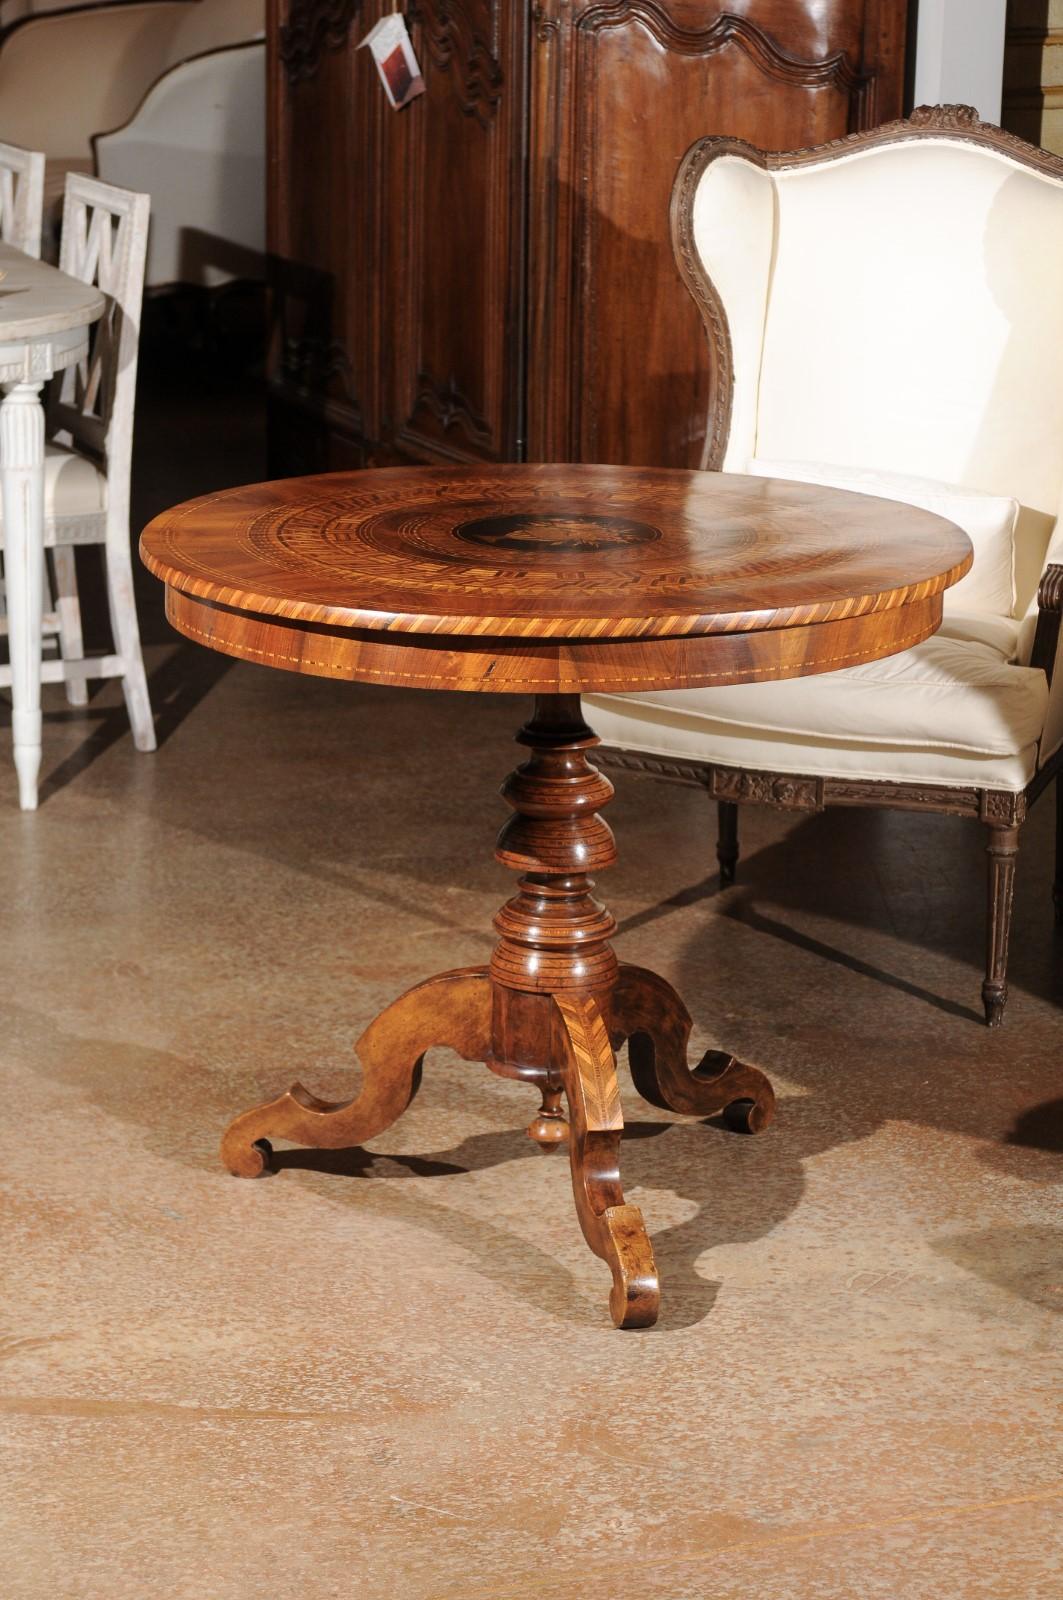 Inlay French Napoleon III Pedestal Table with Marquetry of Ebony, Walnut and Lemon